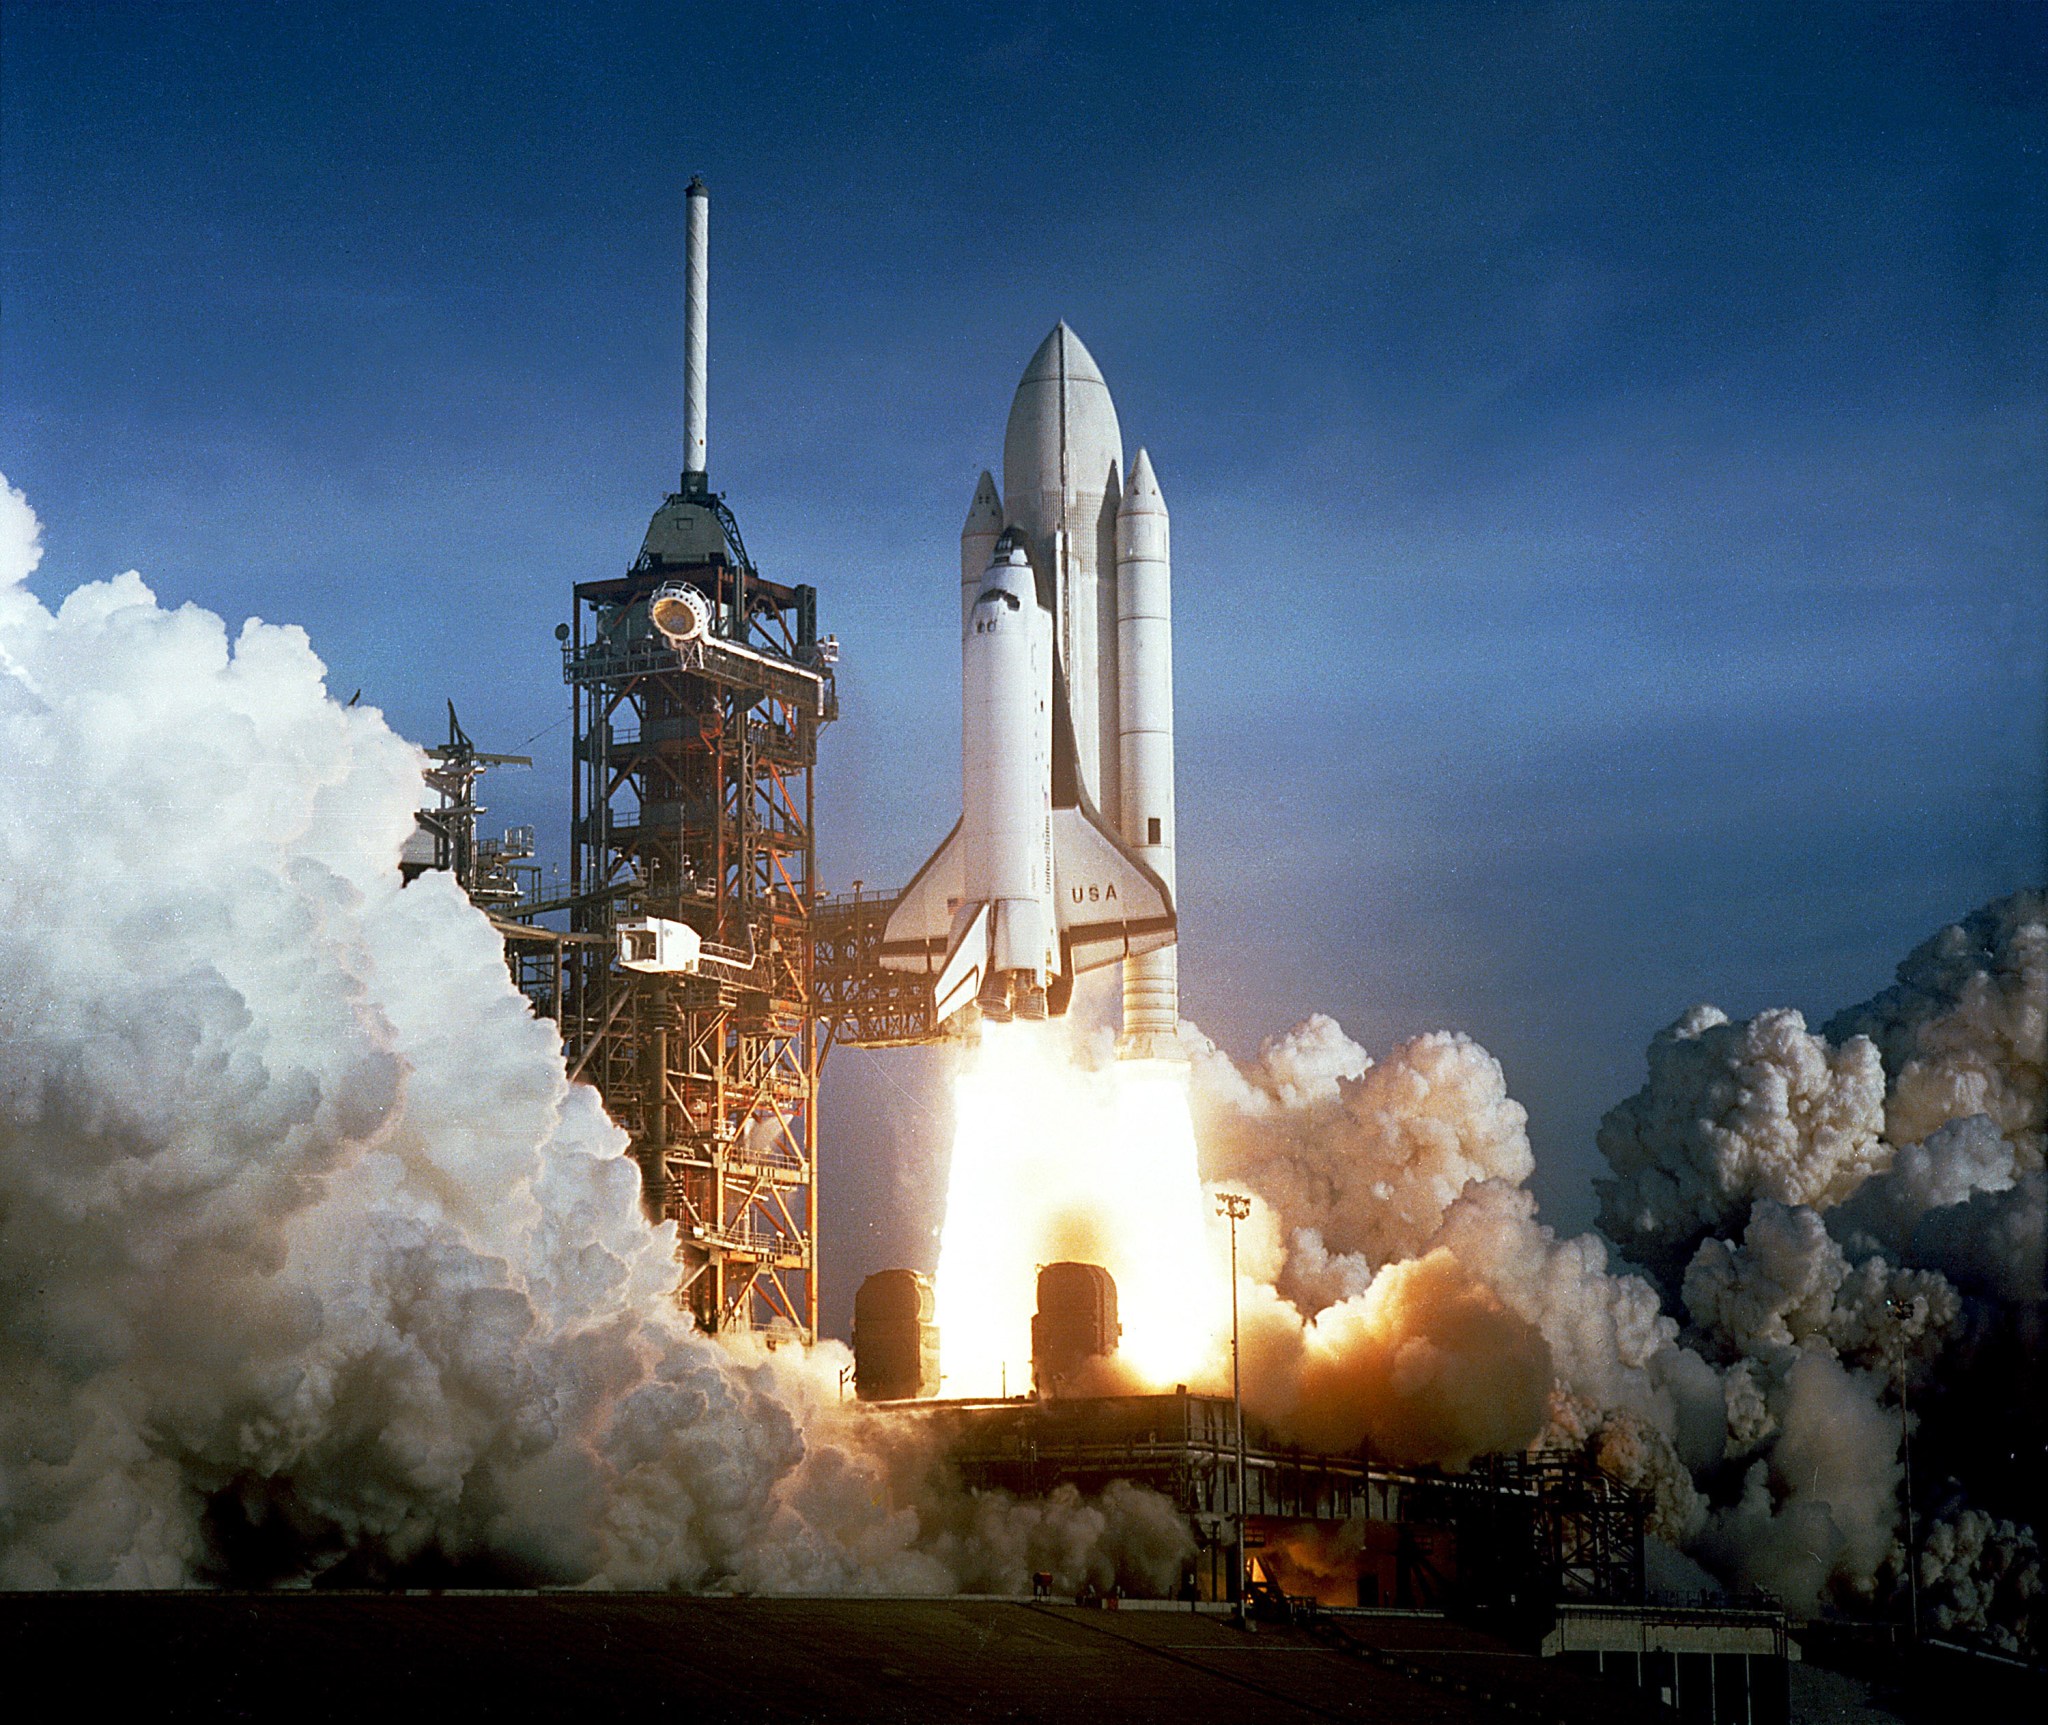 Launch of shuttle Columbia on STS-1 mission.